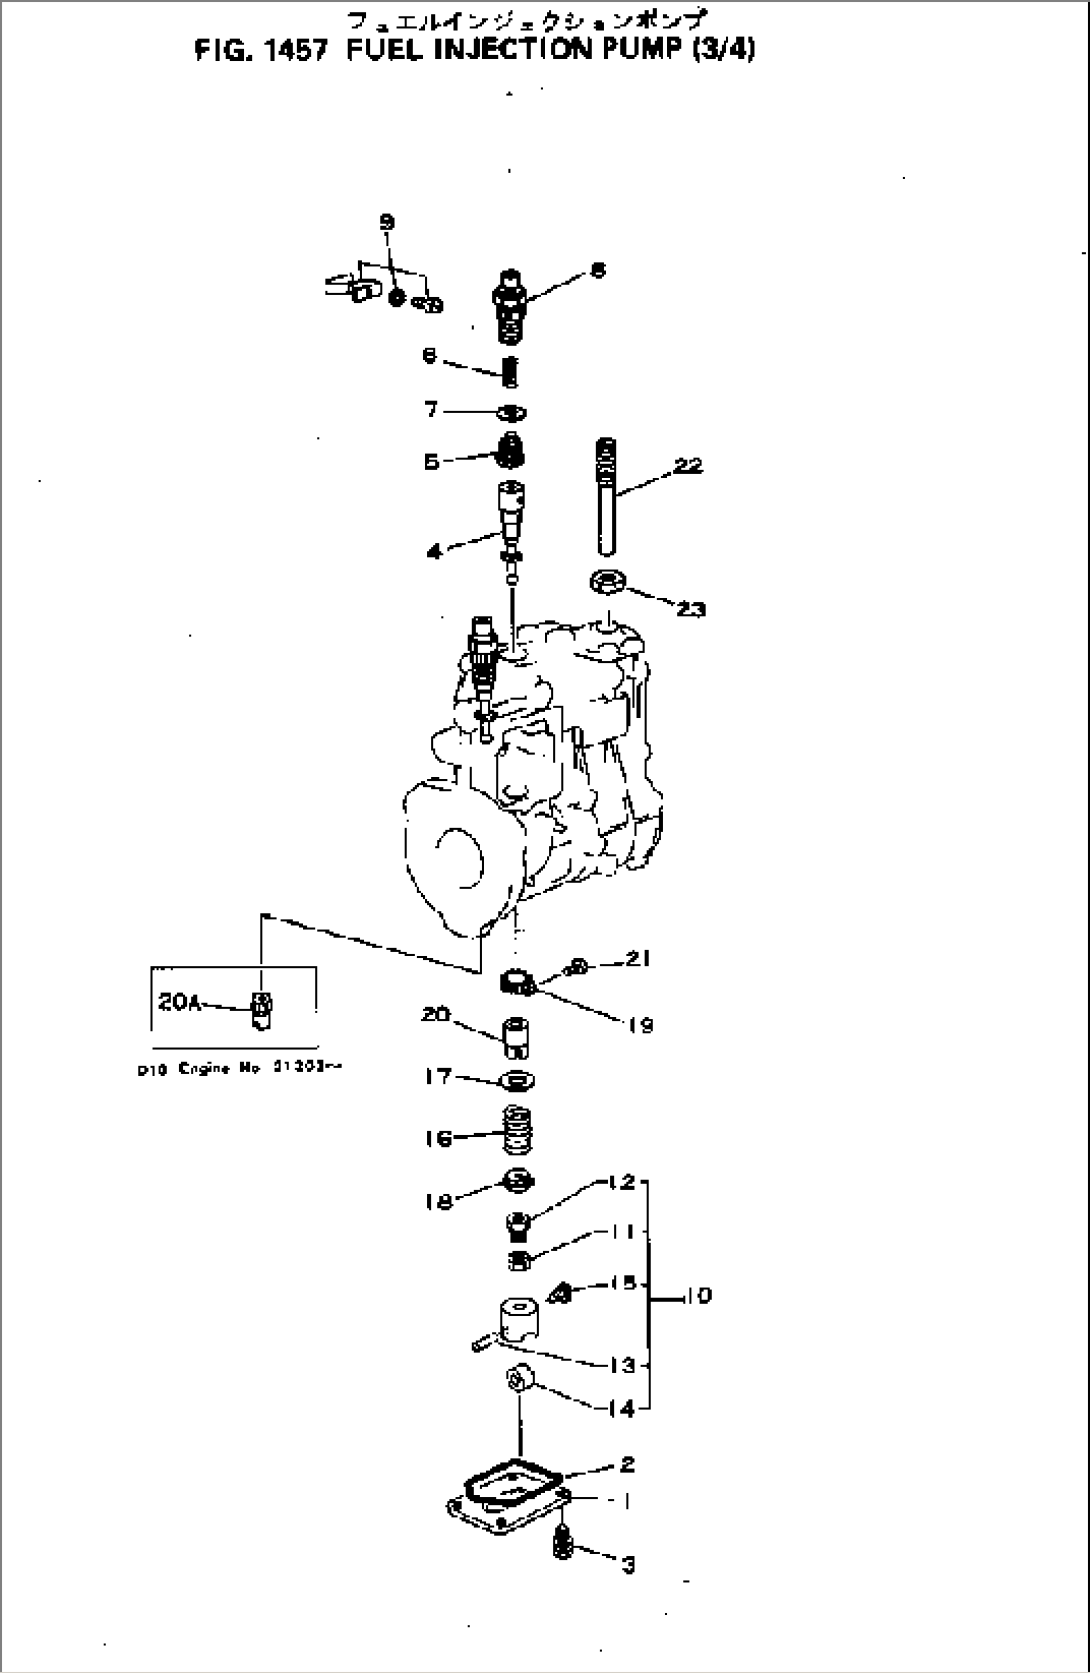 FUEL INJECTION PUMP (3/4)